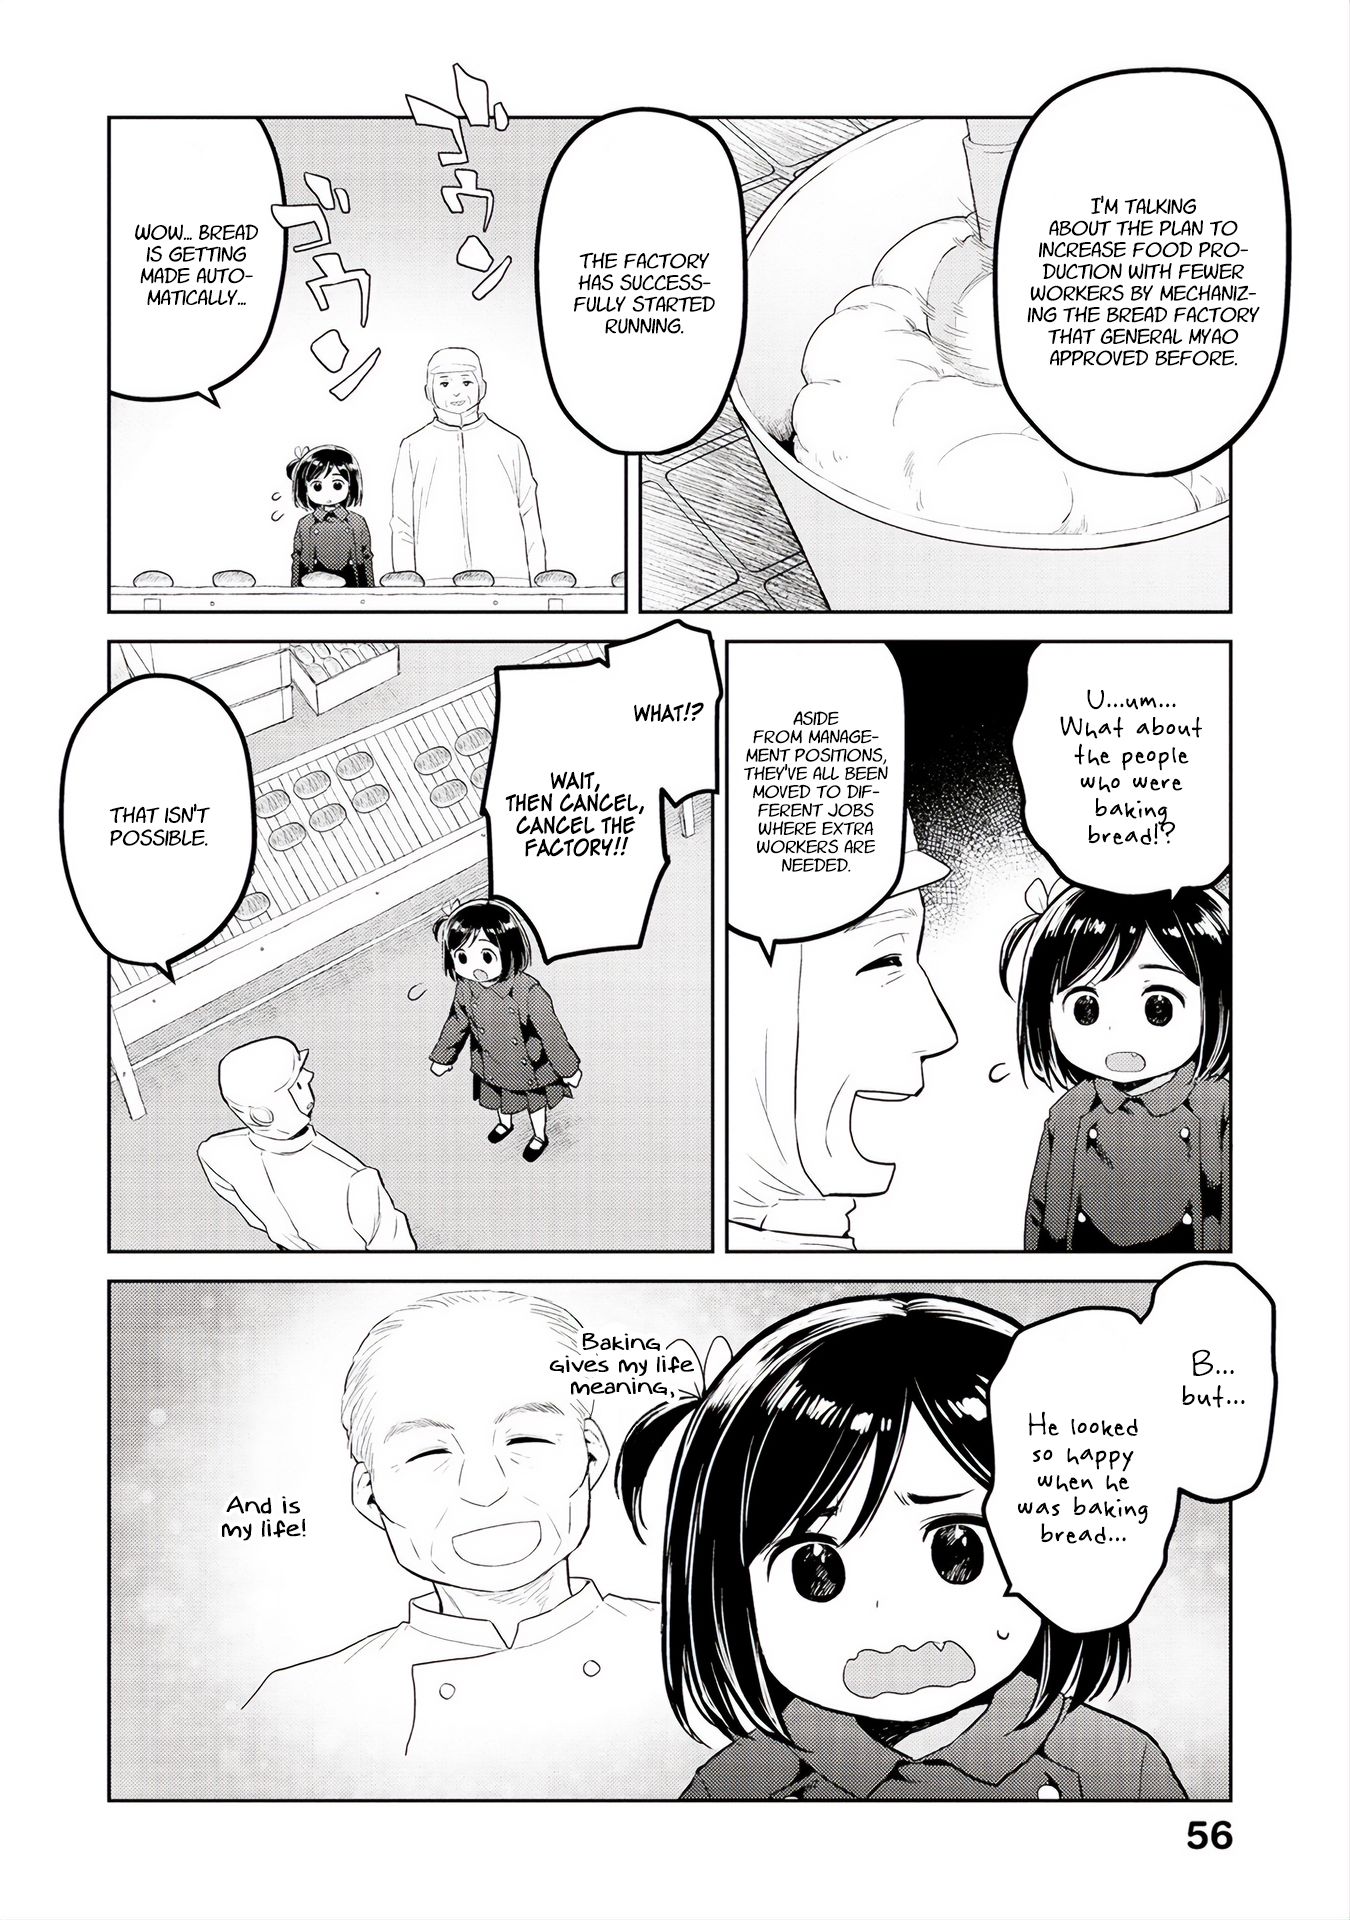 Oh, Our General Myao. - chapter 30 - #4